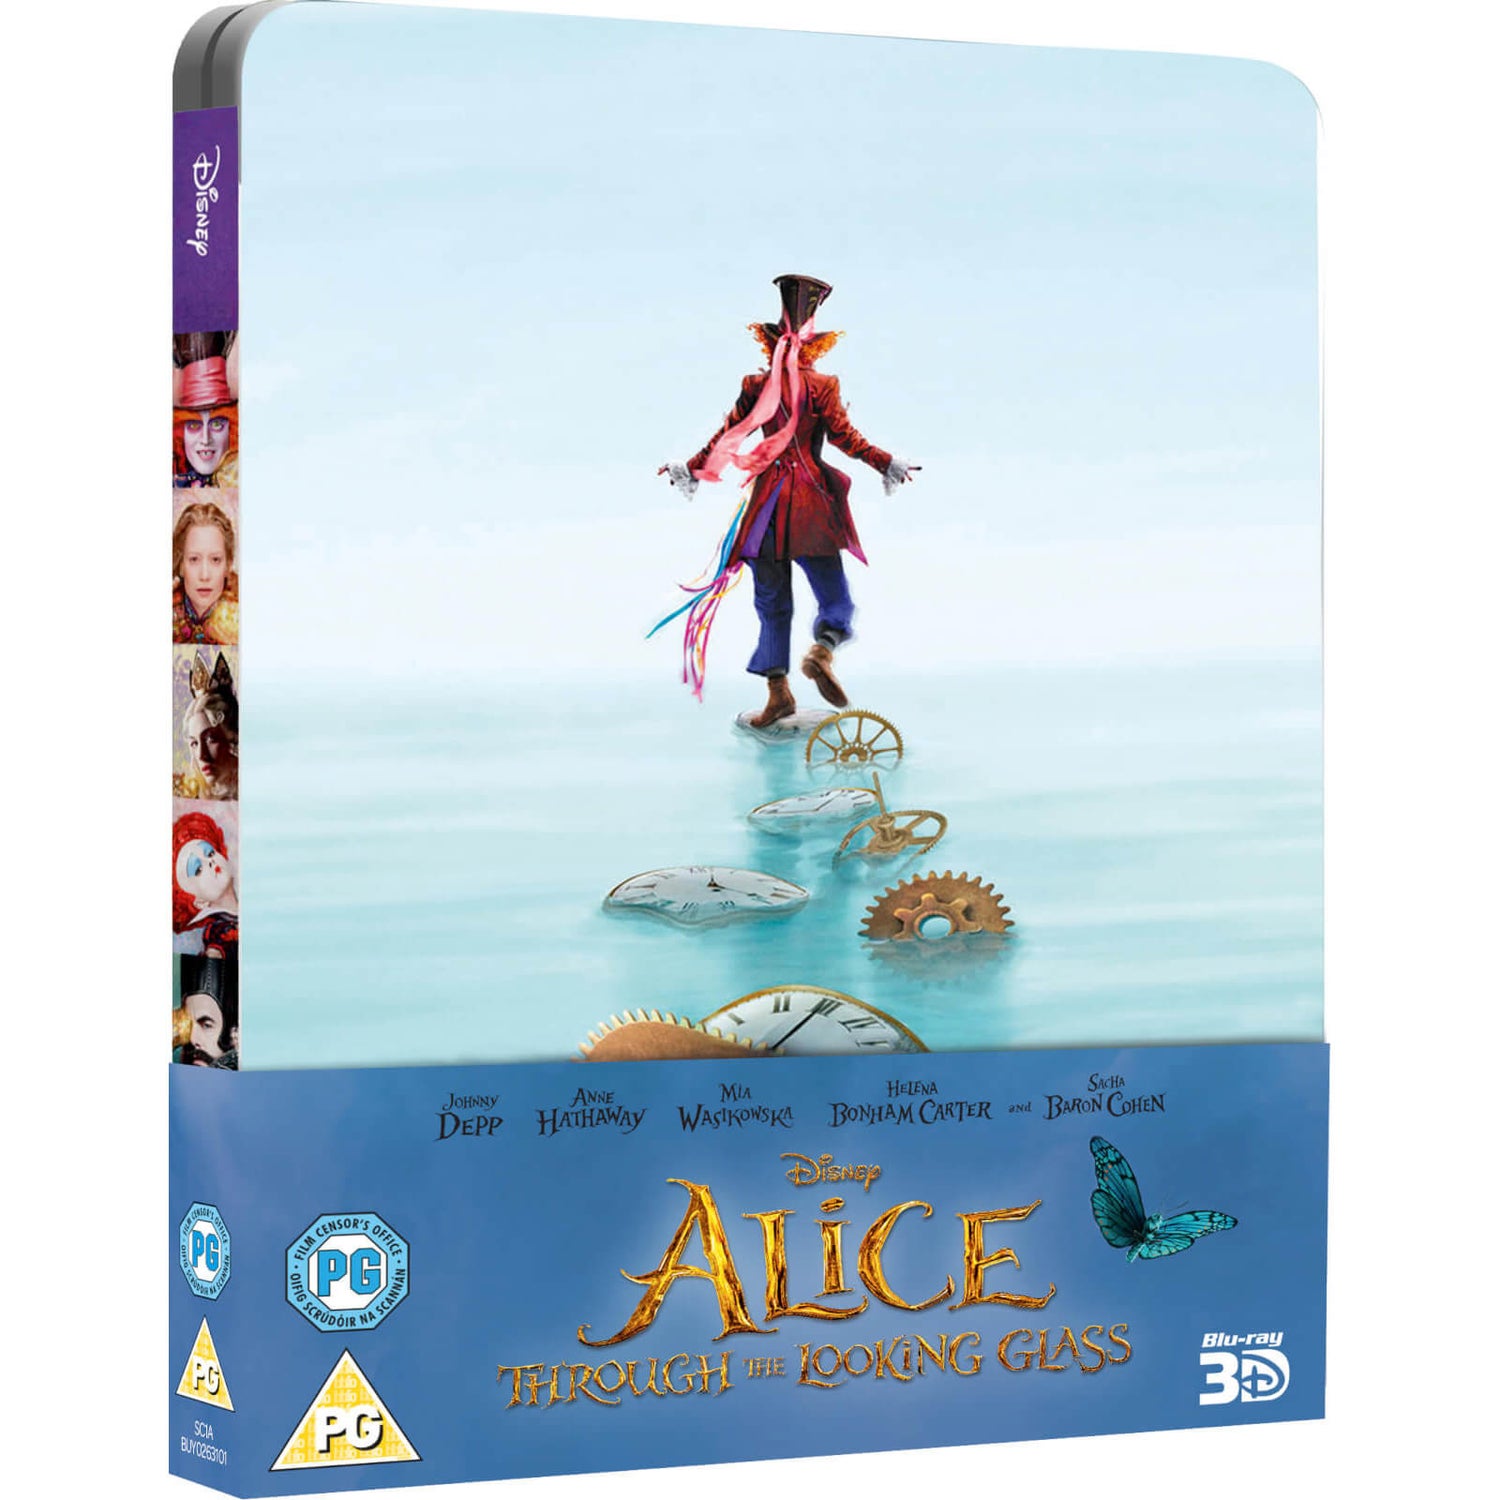 Alice Through The Looking Glass 3D (Incl. 2D) - Limited Edition Steelbook (UK Edition)